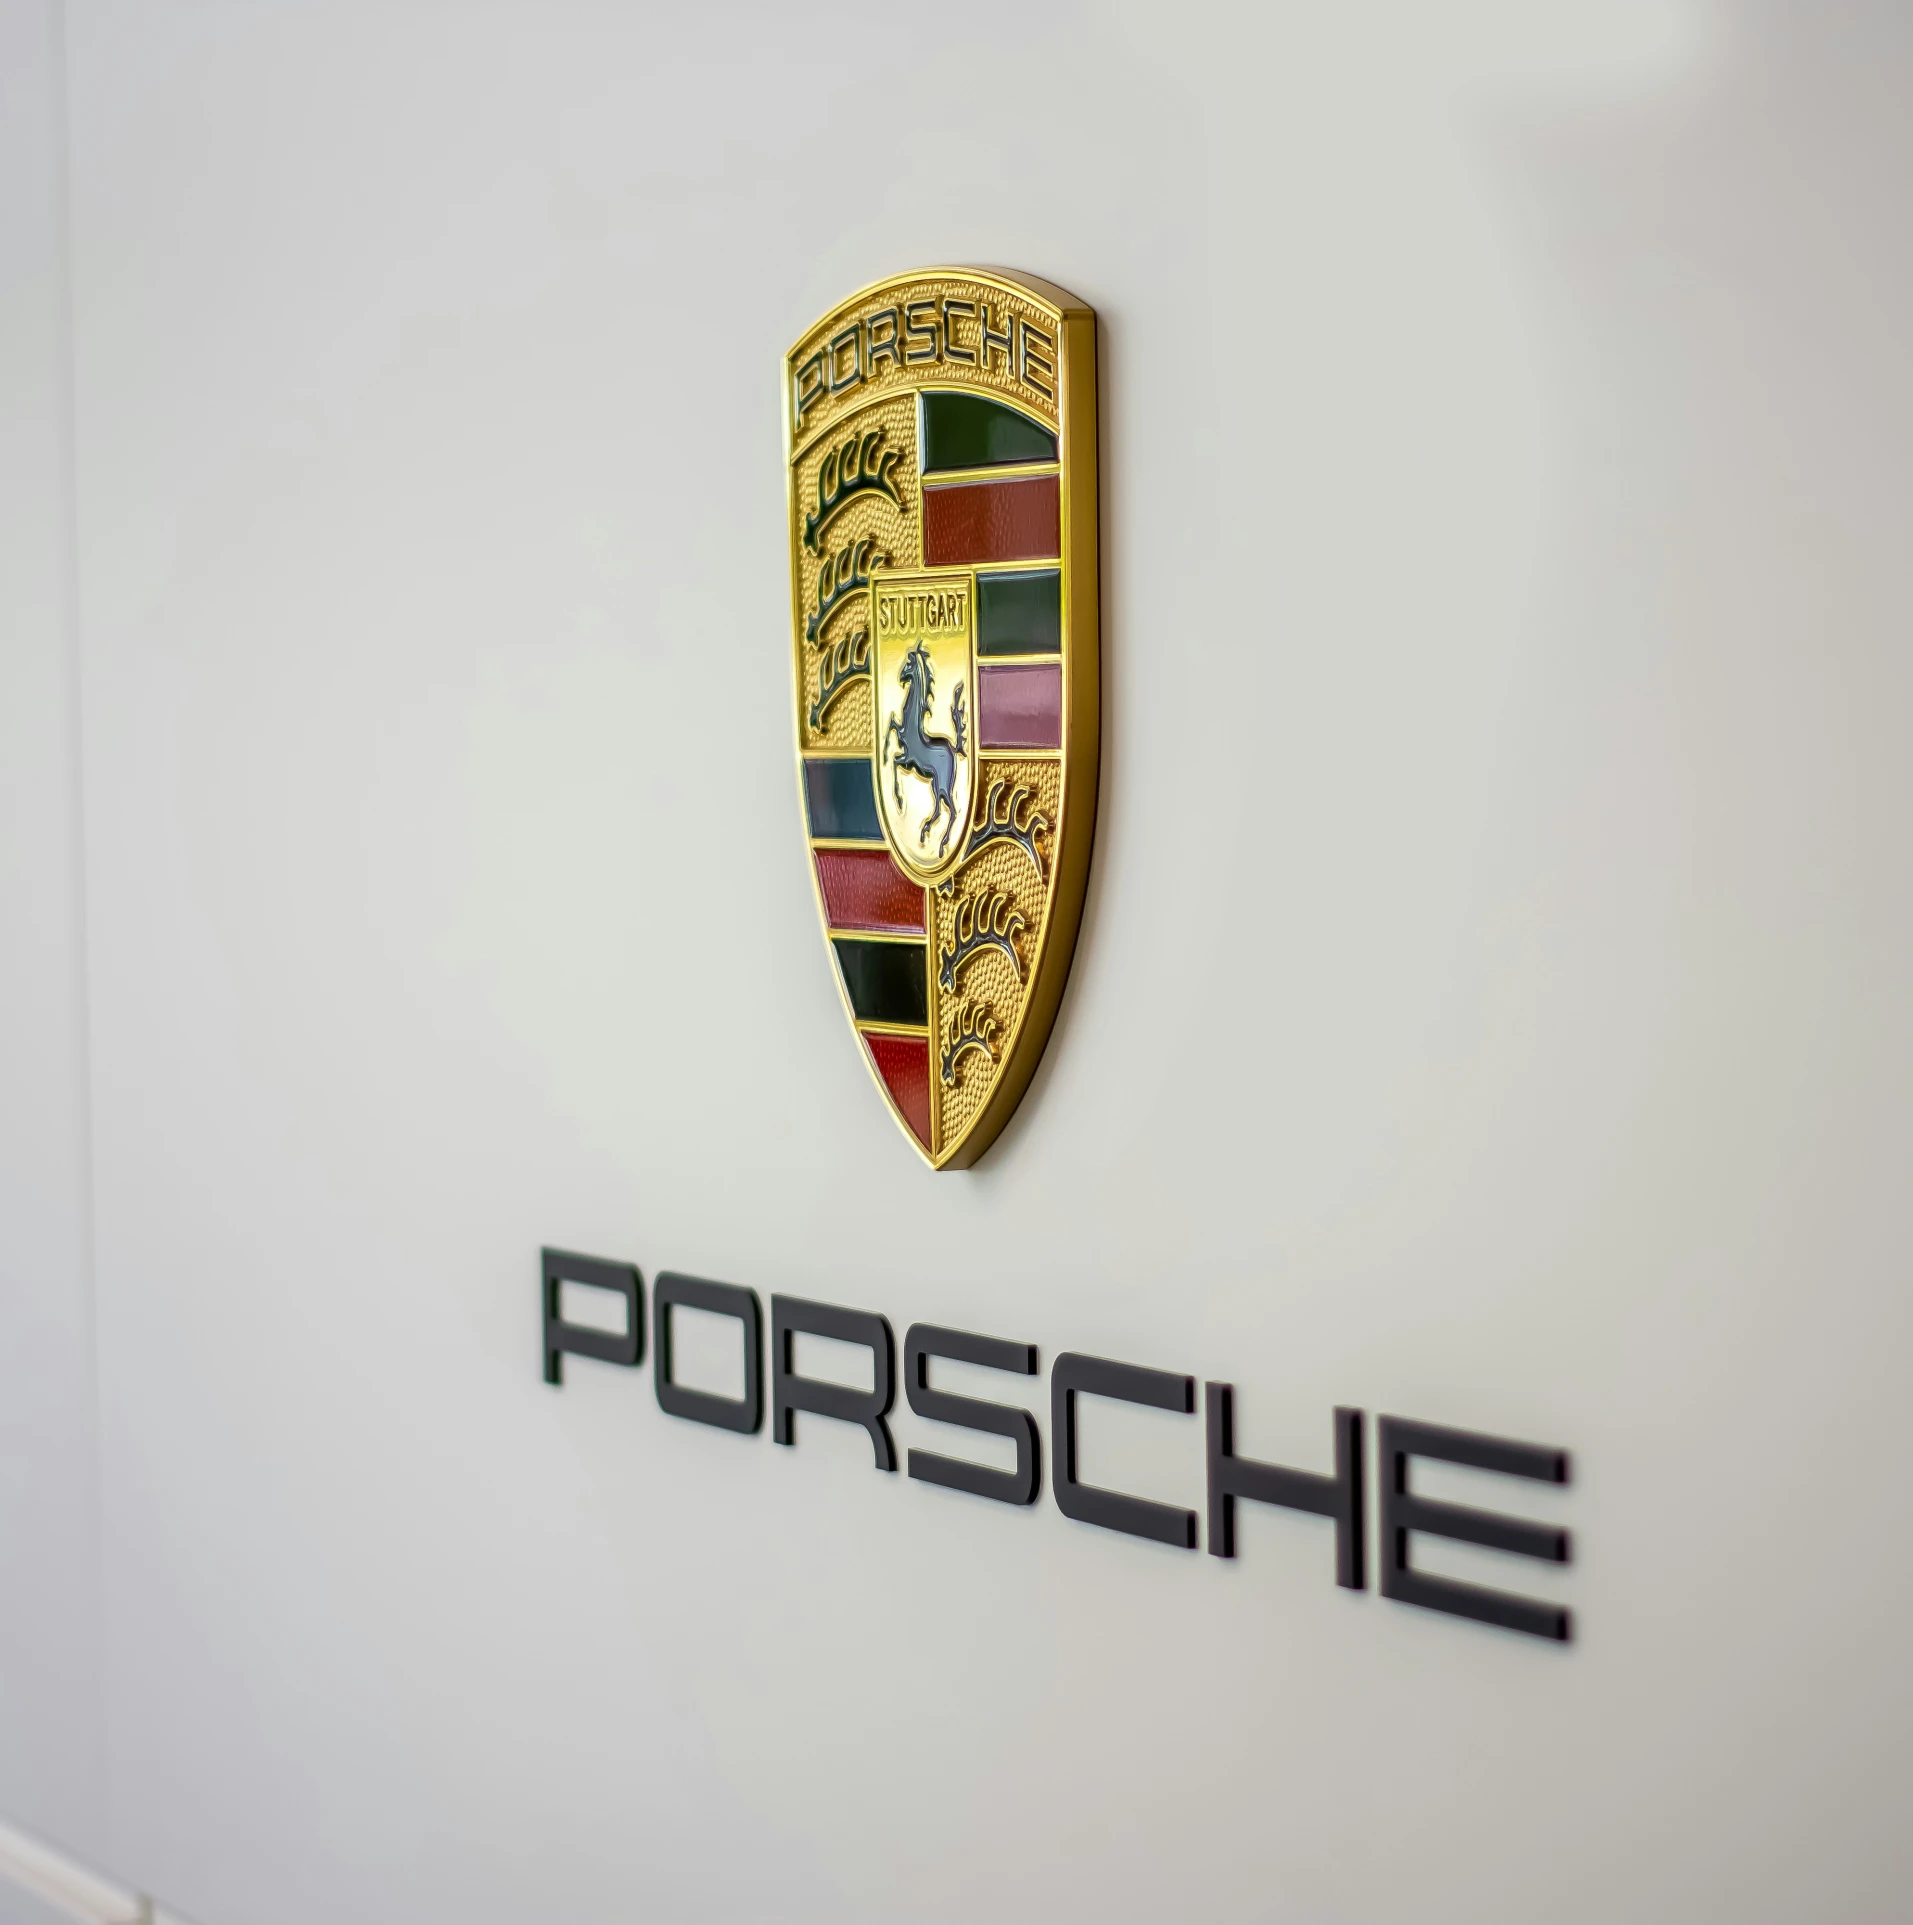 the porsche badge is shown on a white wall